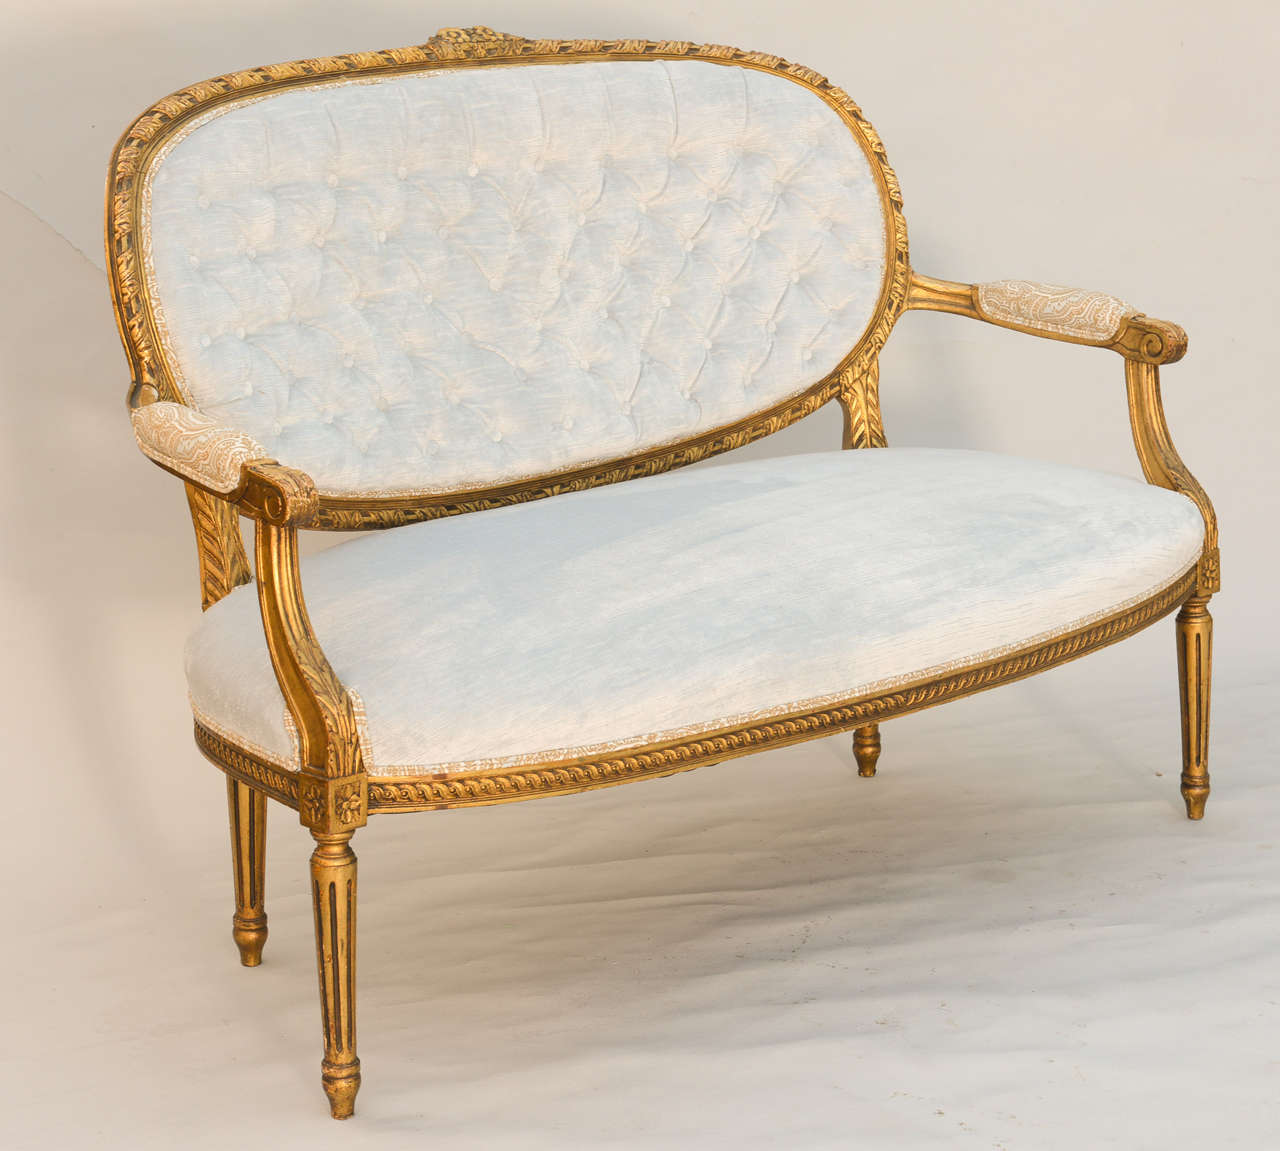 Louis XVI 19th Century French Giltwood Canape Settee 1